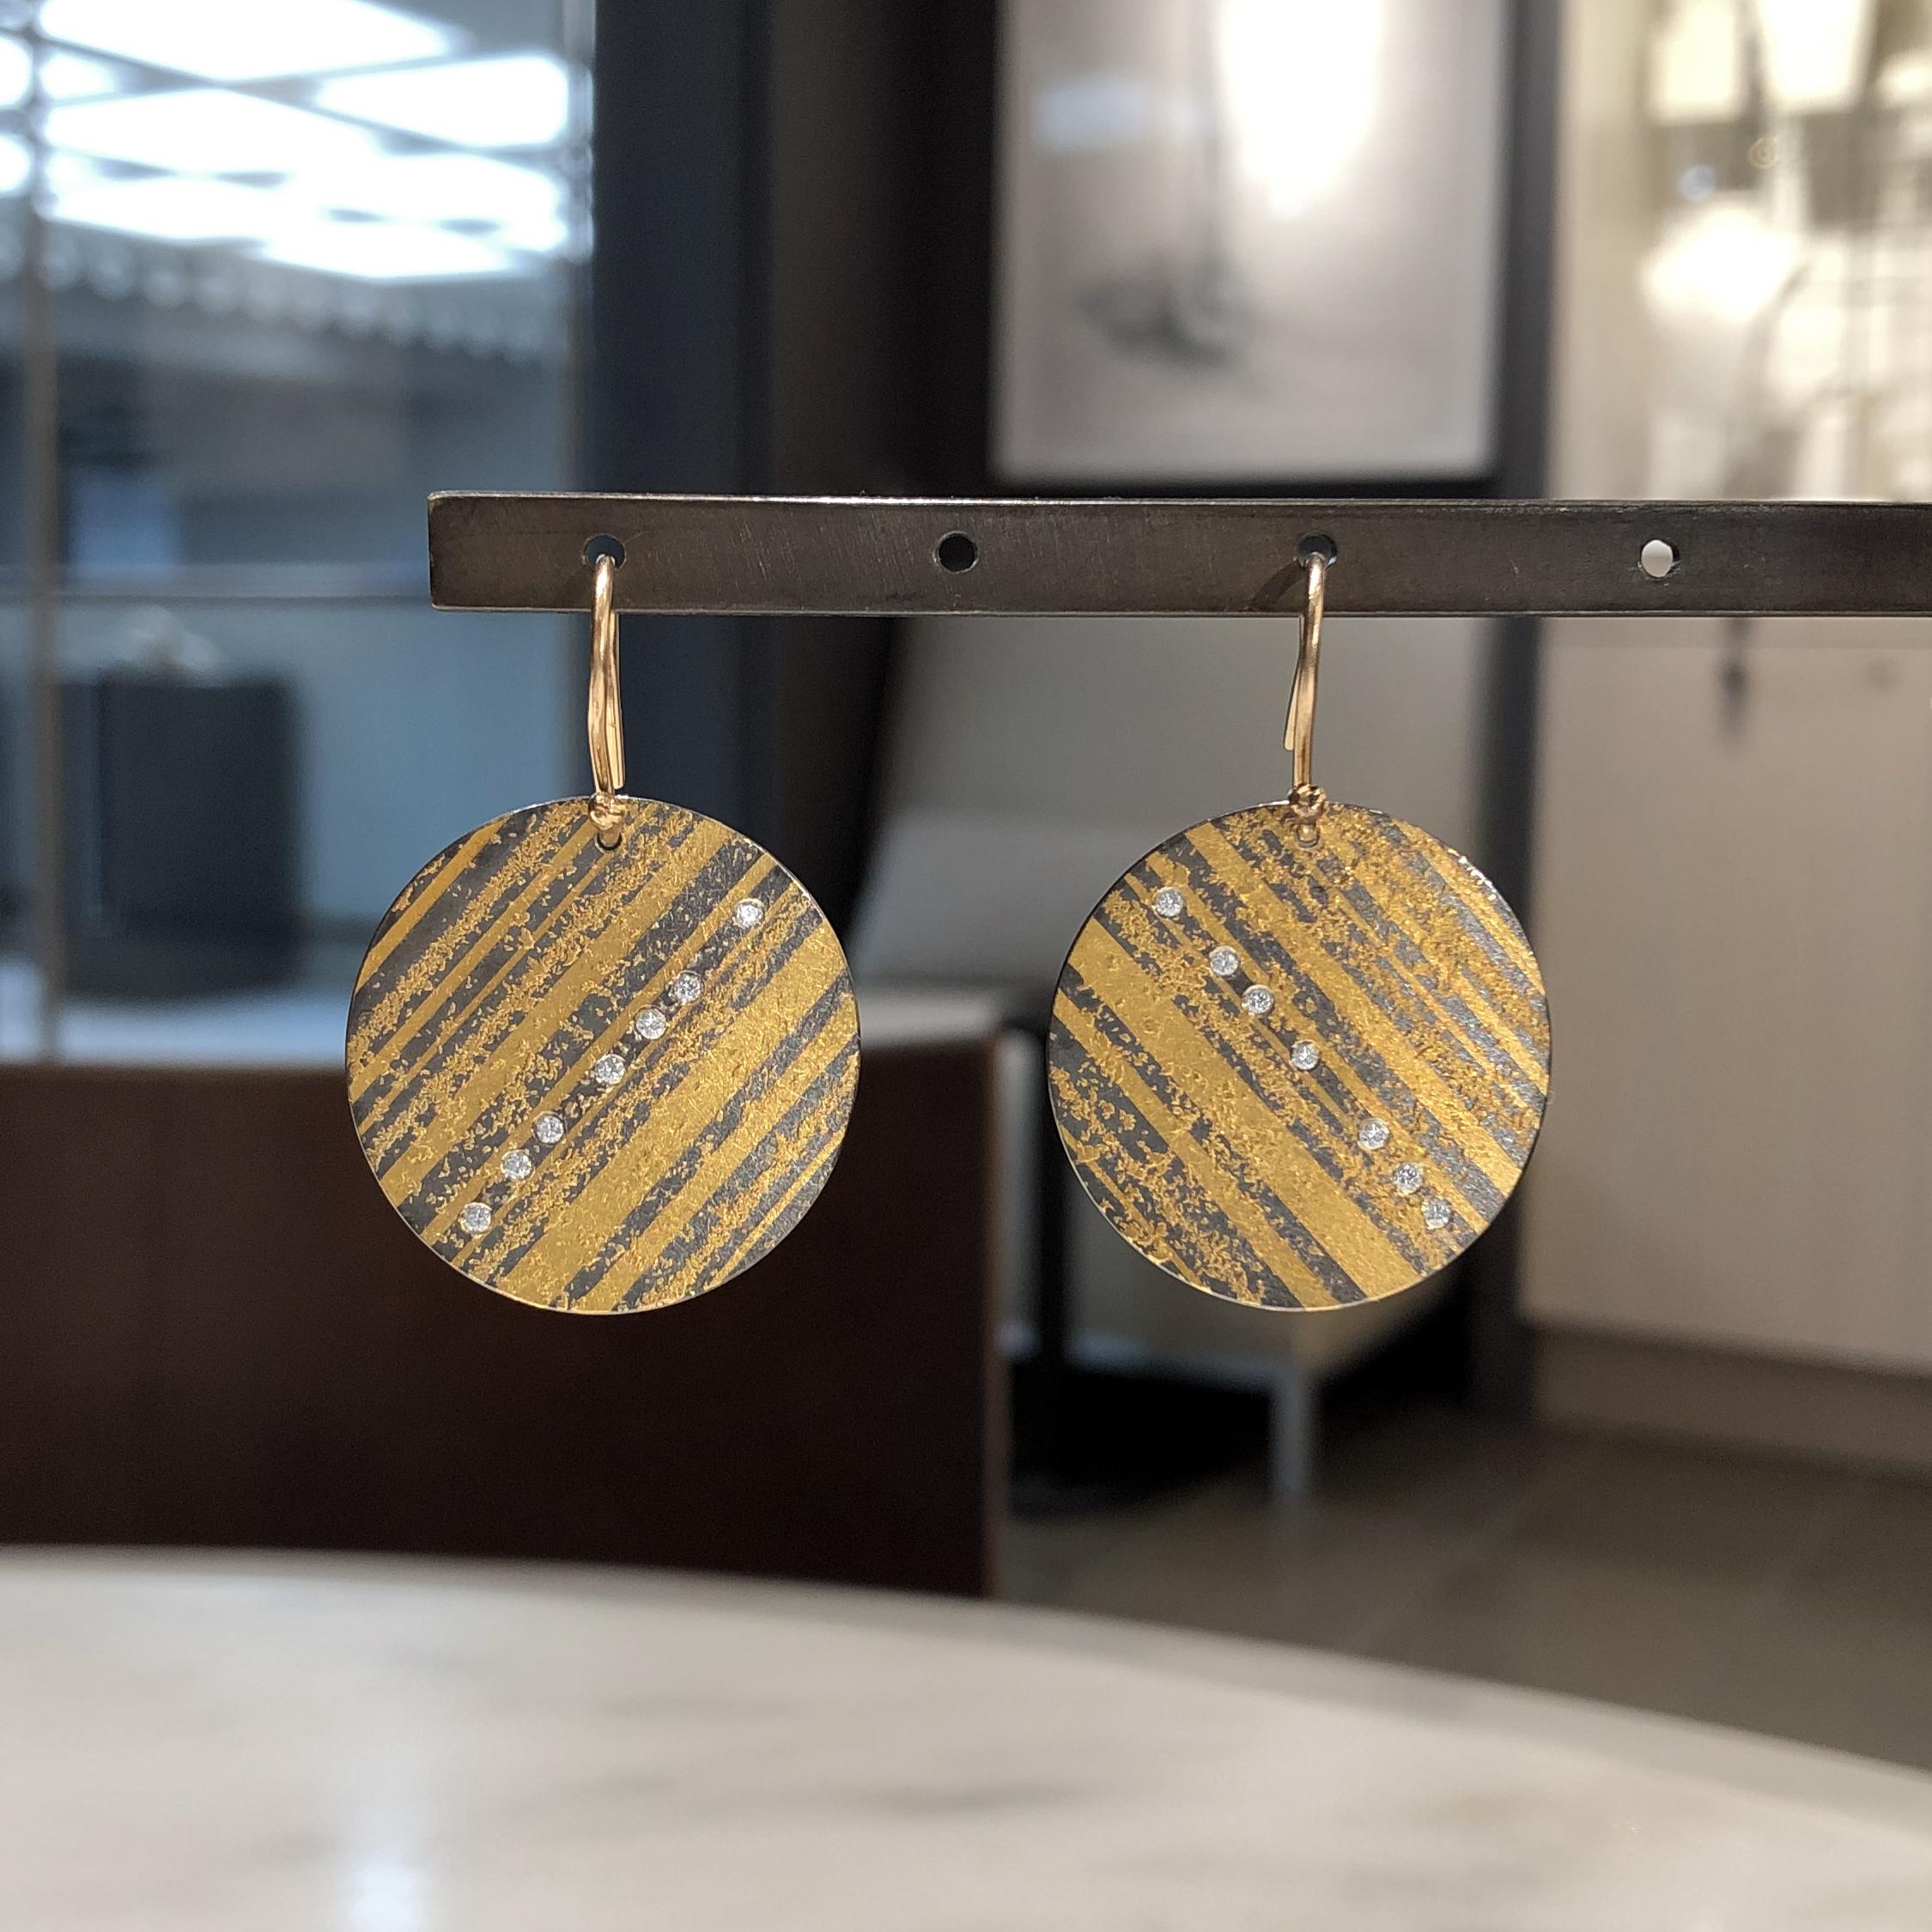 One of a Kind Curved Disc Drop Earrings hand-fabricated in 2019 in Germany by award-winning jewelry maker Atelier Zobel (Peter Schmid) in 24k and 18k yellow gold and oxidized sterling silver with fourteen round brilliant-cut diamonds totaling 0.14